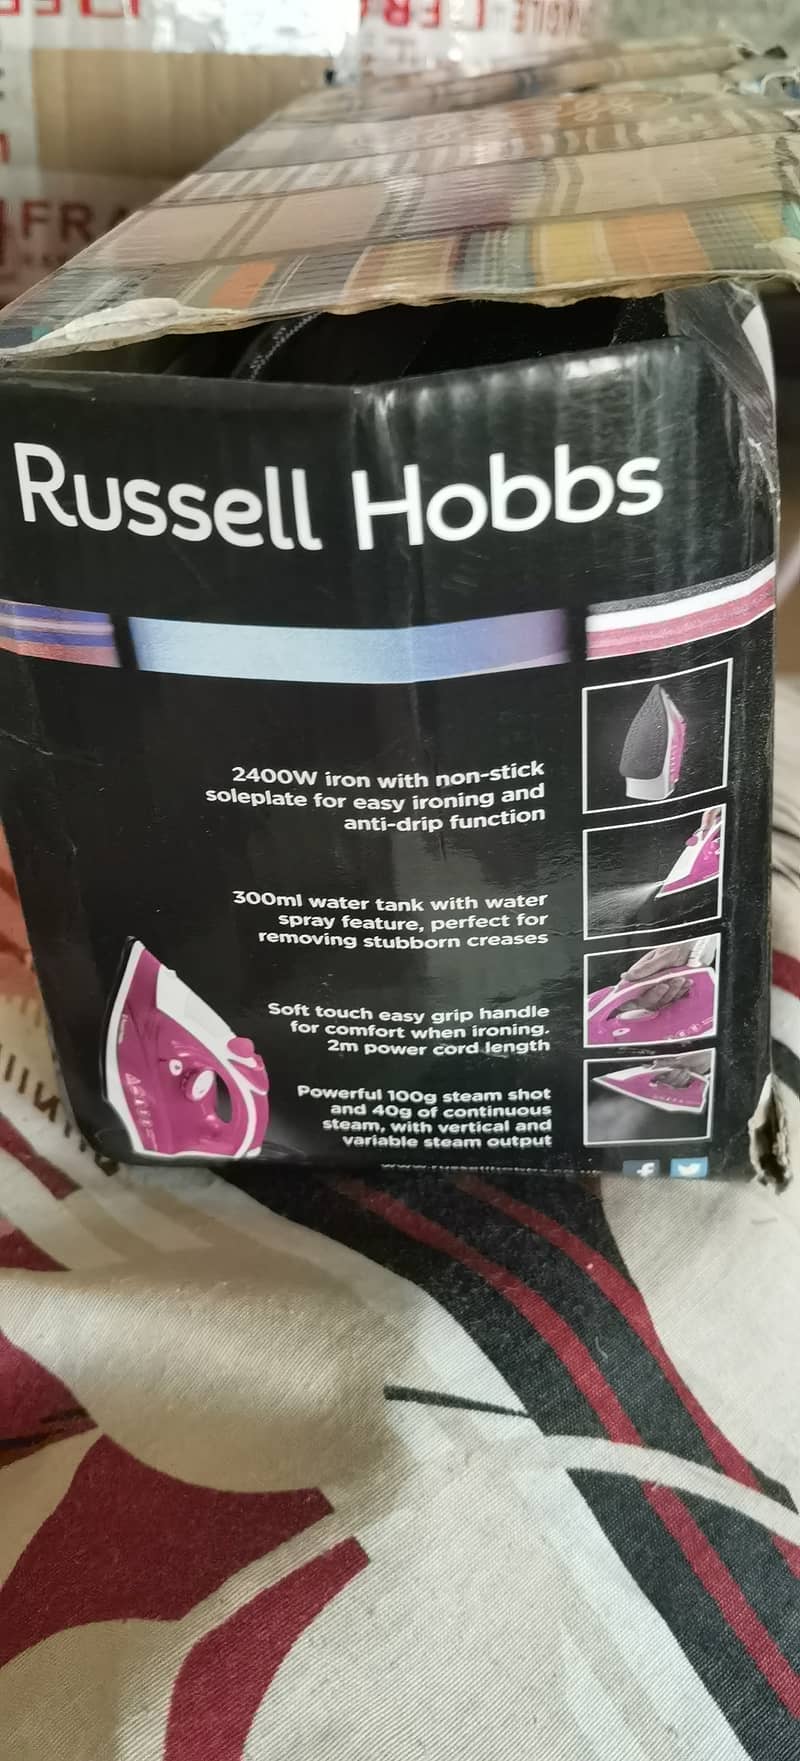 Russell hobbs iron For Sale 6